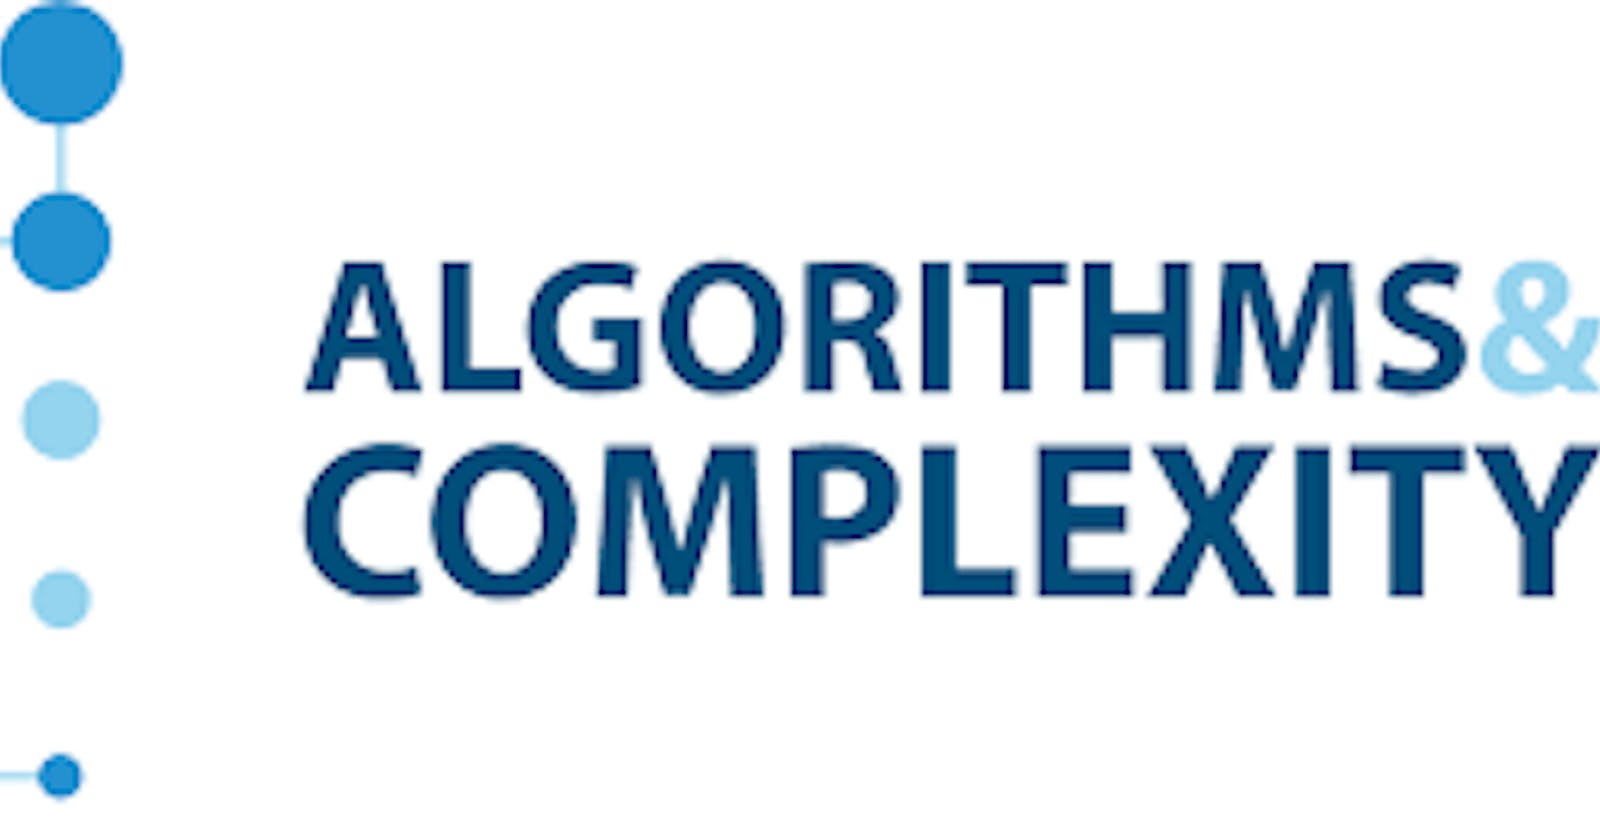 The Complexity of an algorithm